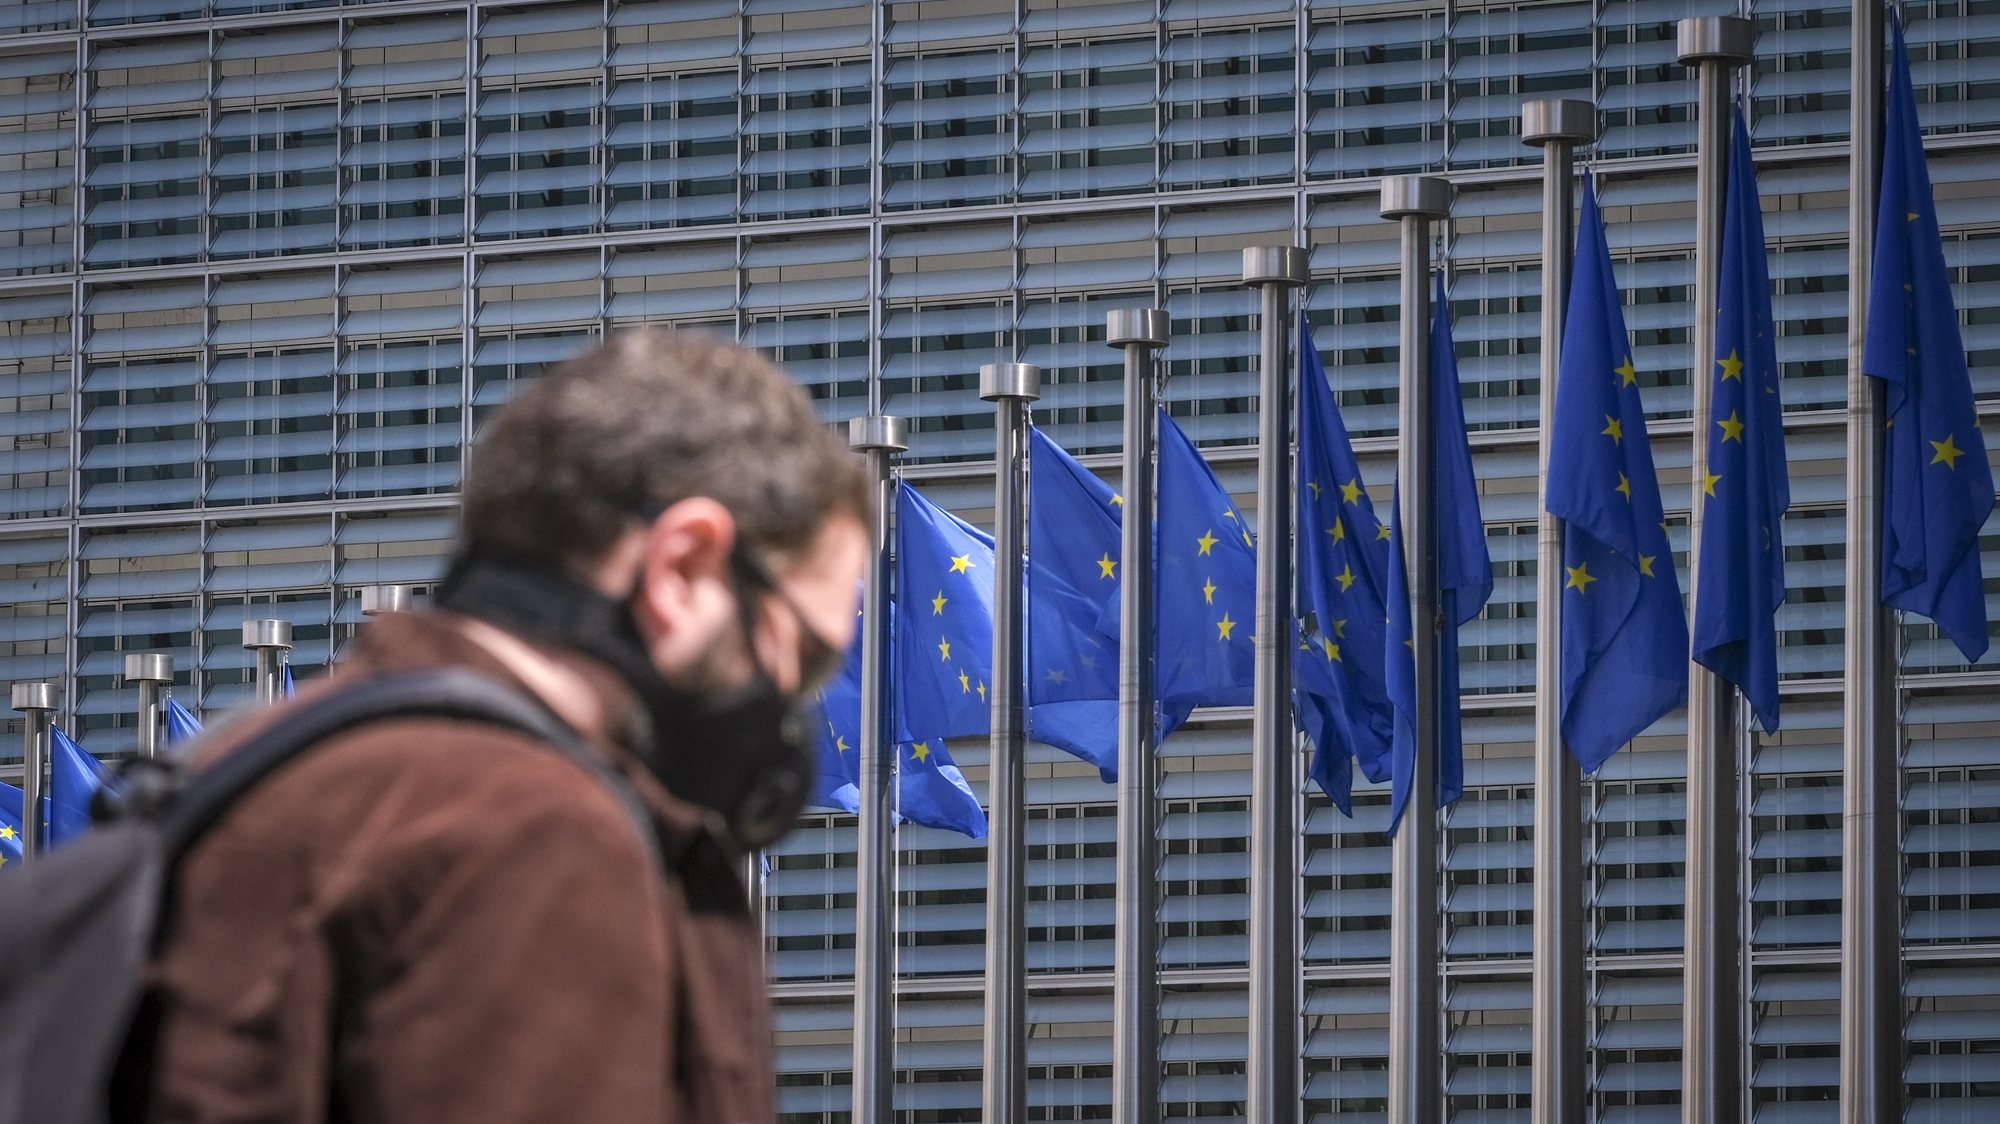 epa08443018 A man wearing a face mask walks in front of the European Commission flags at the Berlaymont building headquarters in Brussels, Belgium, 25 May 2020. Countries around the world are gradually easing COVID-19 lockdown restrictions in an effort to restart the economy and help people in their daily routines.  EPA/OLIVIER HOSLET